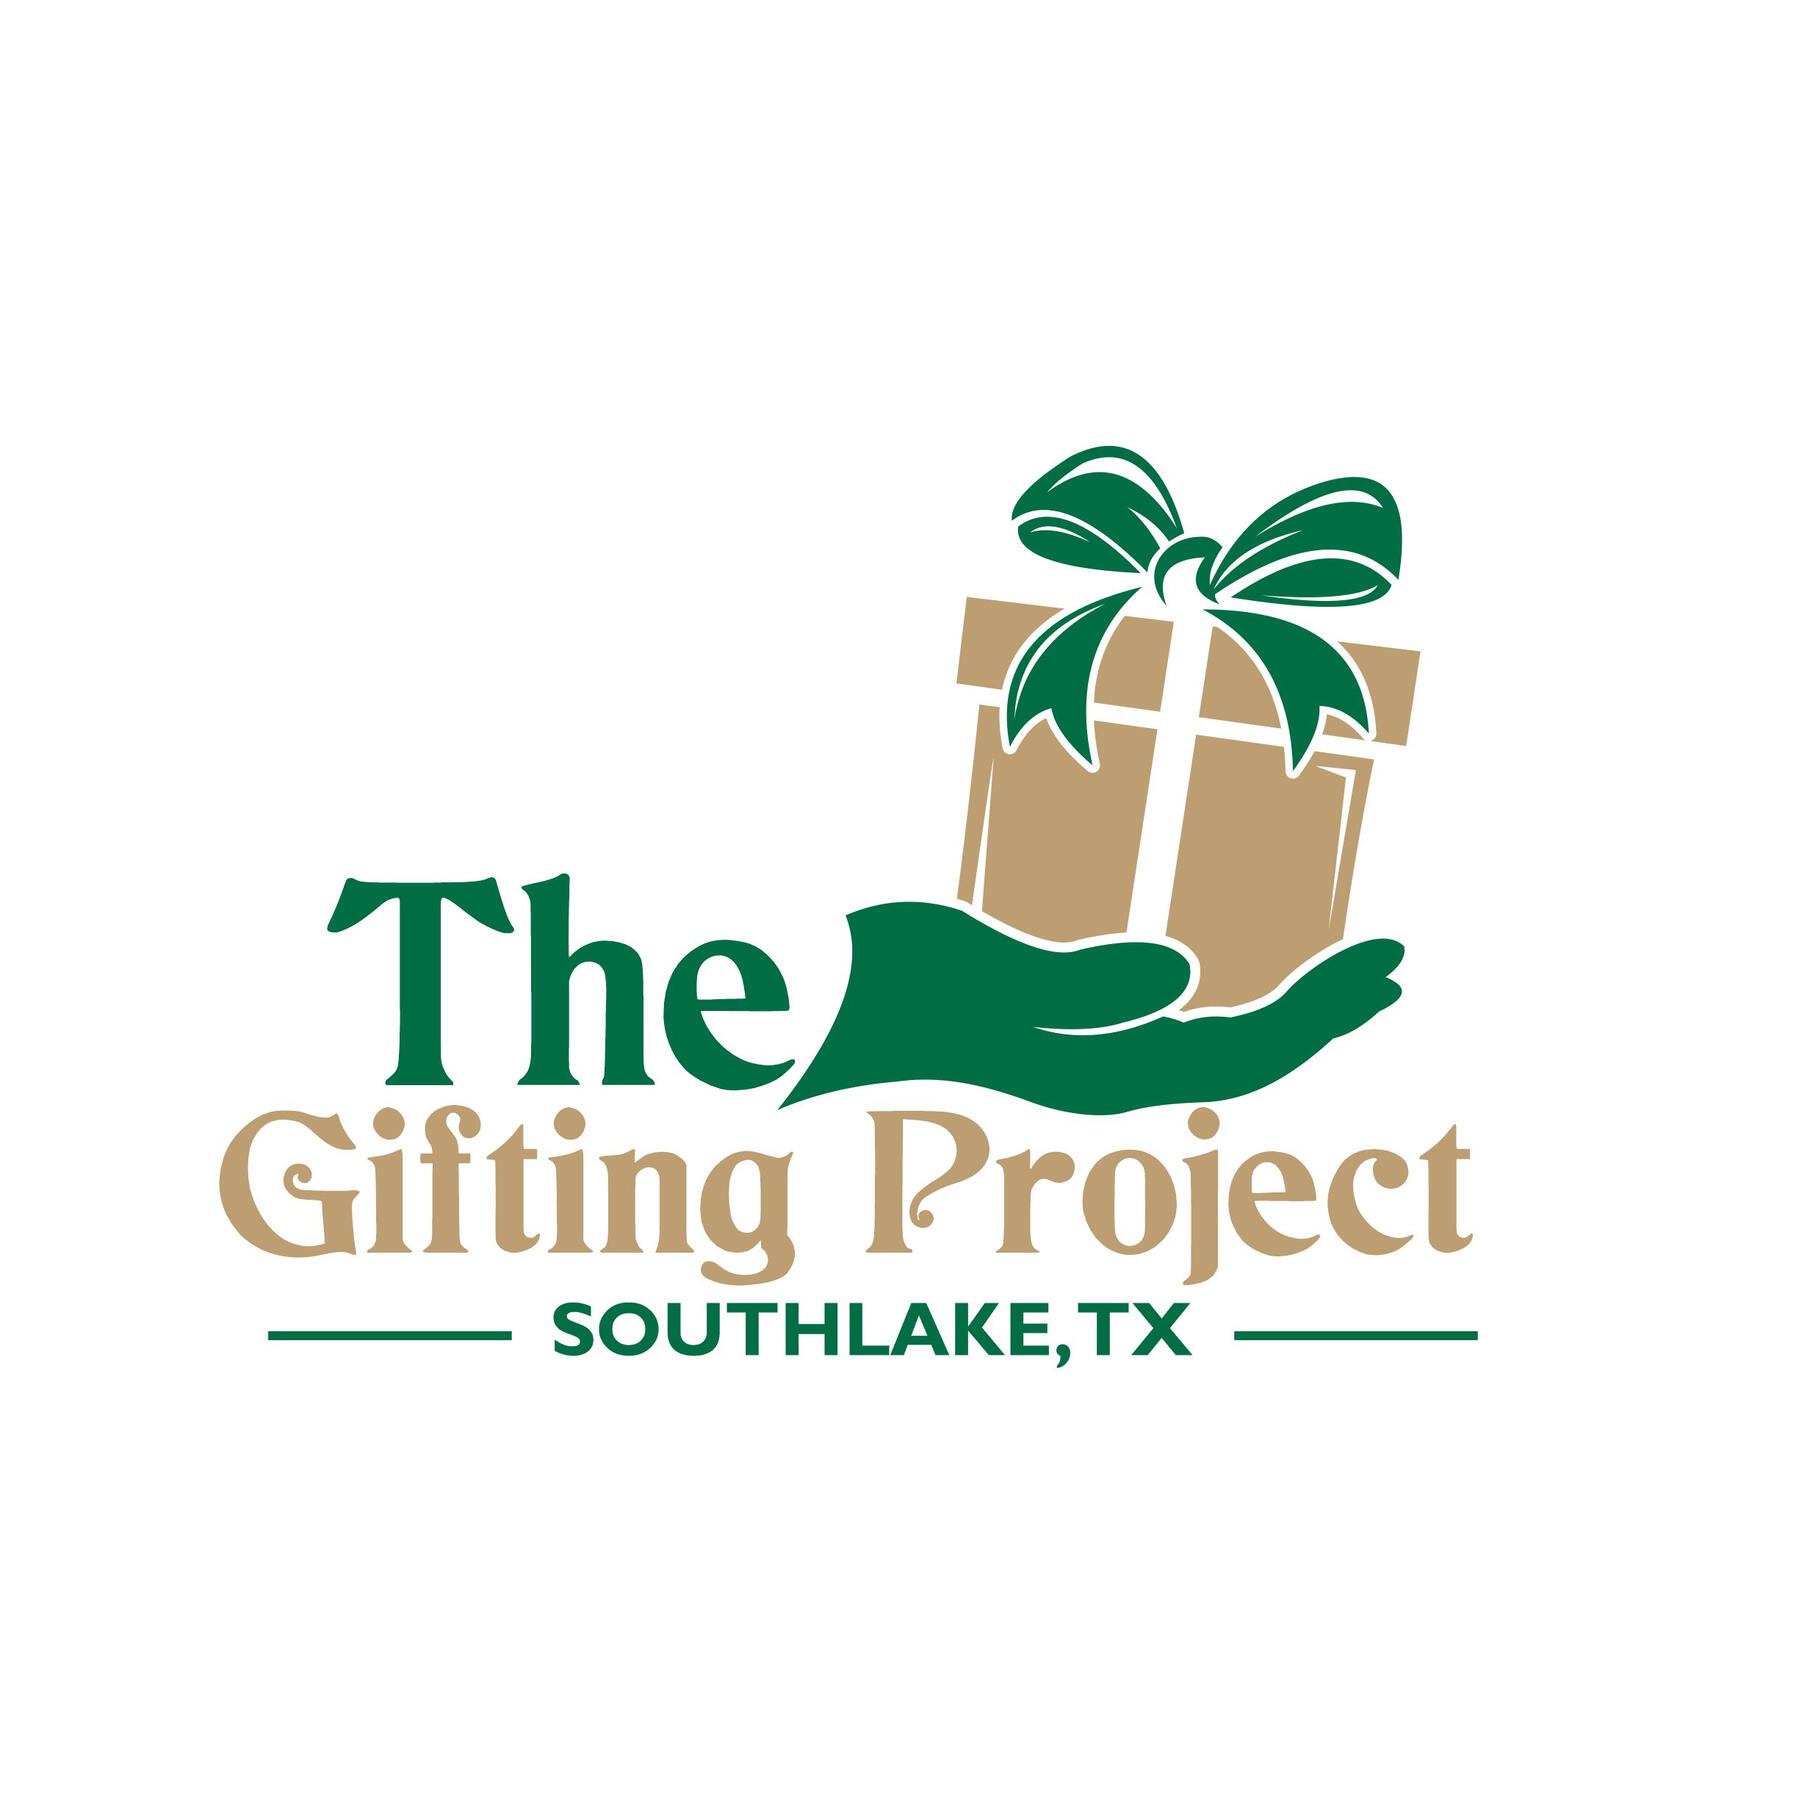 The Gifting Project